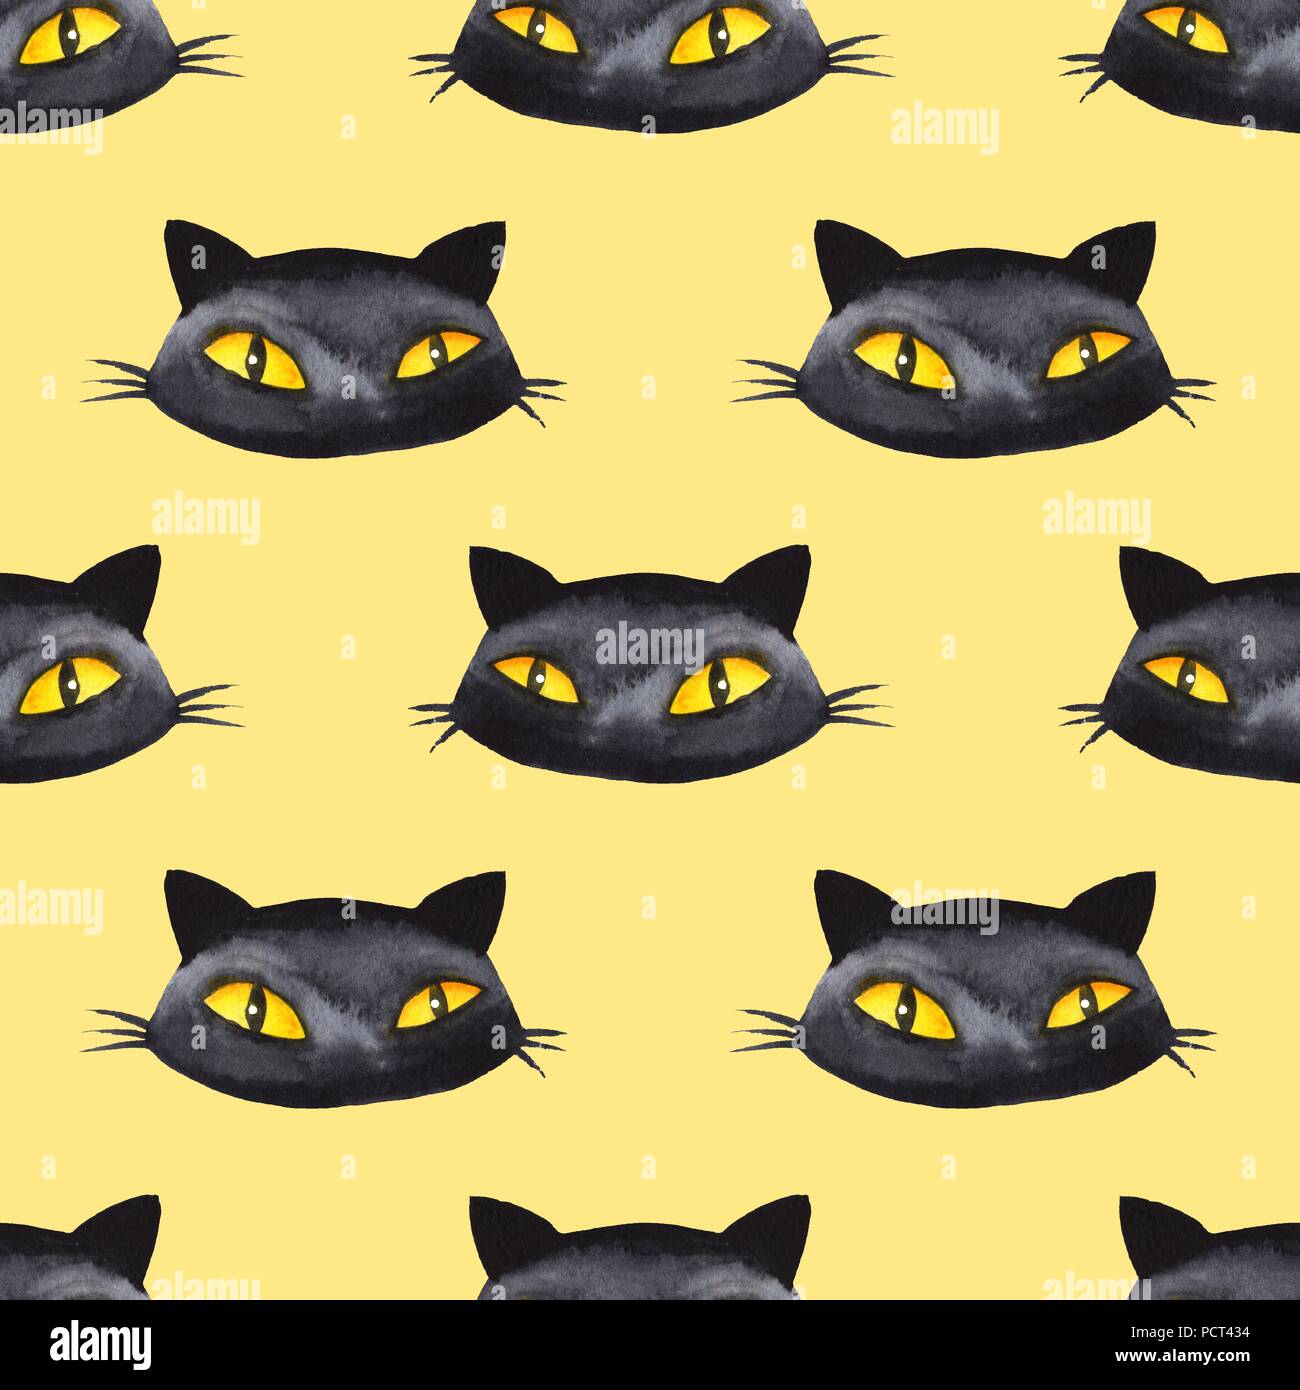 Halloween watercolor seamless pattern 2. Background with black cats Stock Photo